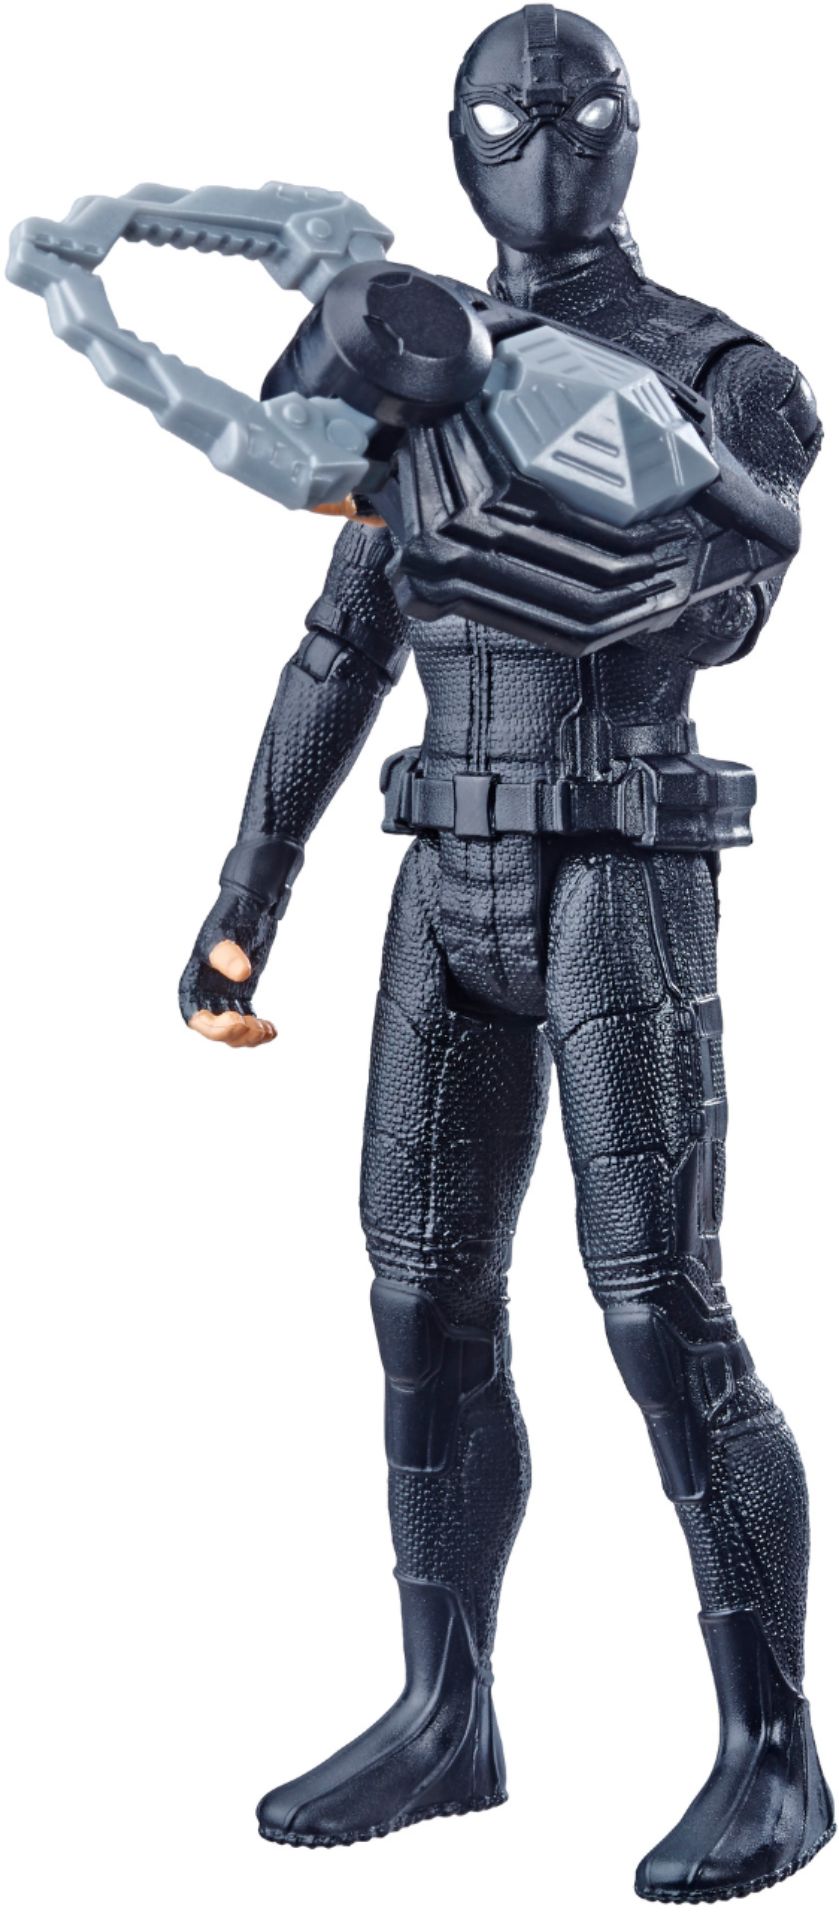 Hasbro - Spider-Man: Far From Home 6" Action Figure - Styles May Vary